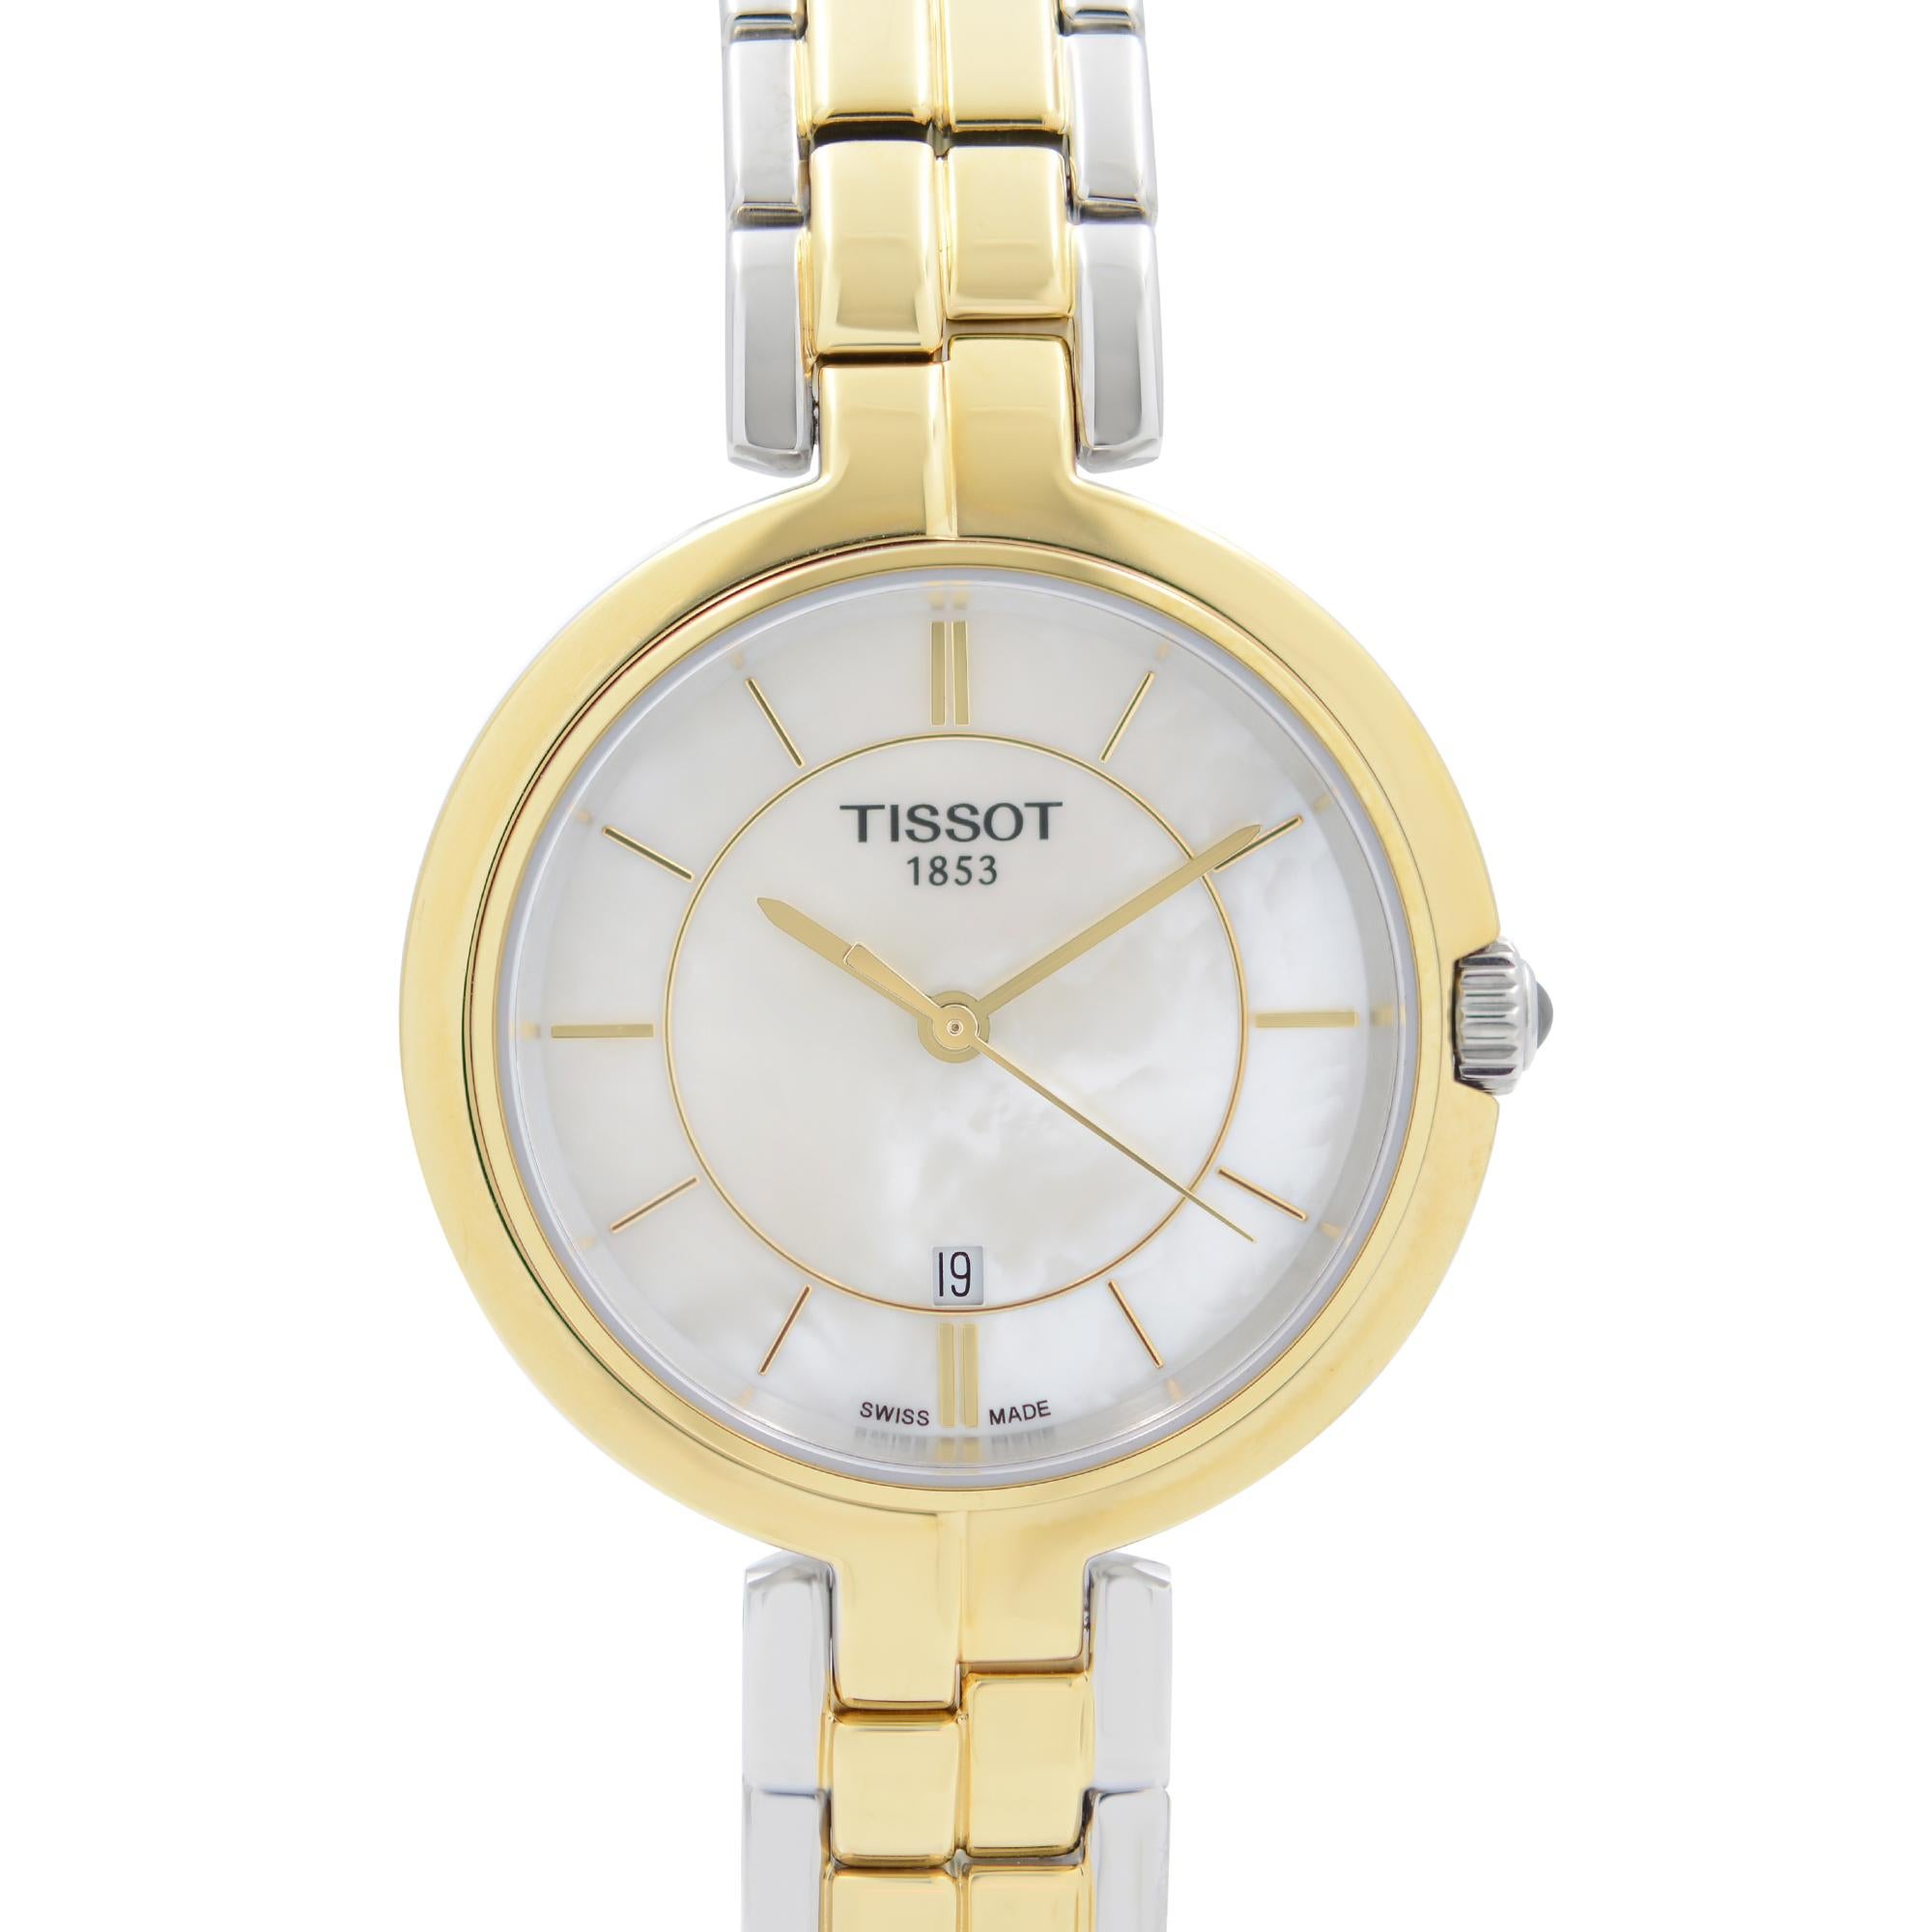 Display Model Tissot Flamingo Quartz Ladies Watch T094.210.22.111.01. The Watch Has Minor Blemishes on Gold Tone Parts Due to Store Handling. This Beautiful Timepiece is Powered by Quartz (Battery) Movement and Features: Rounds Stainless Steel Case